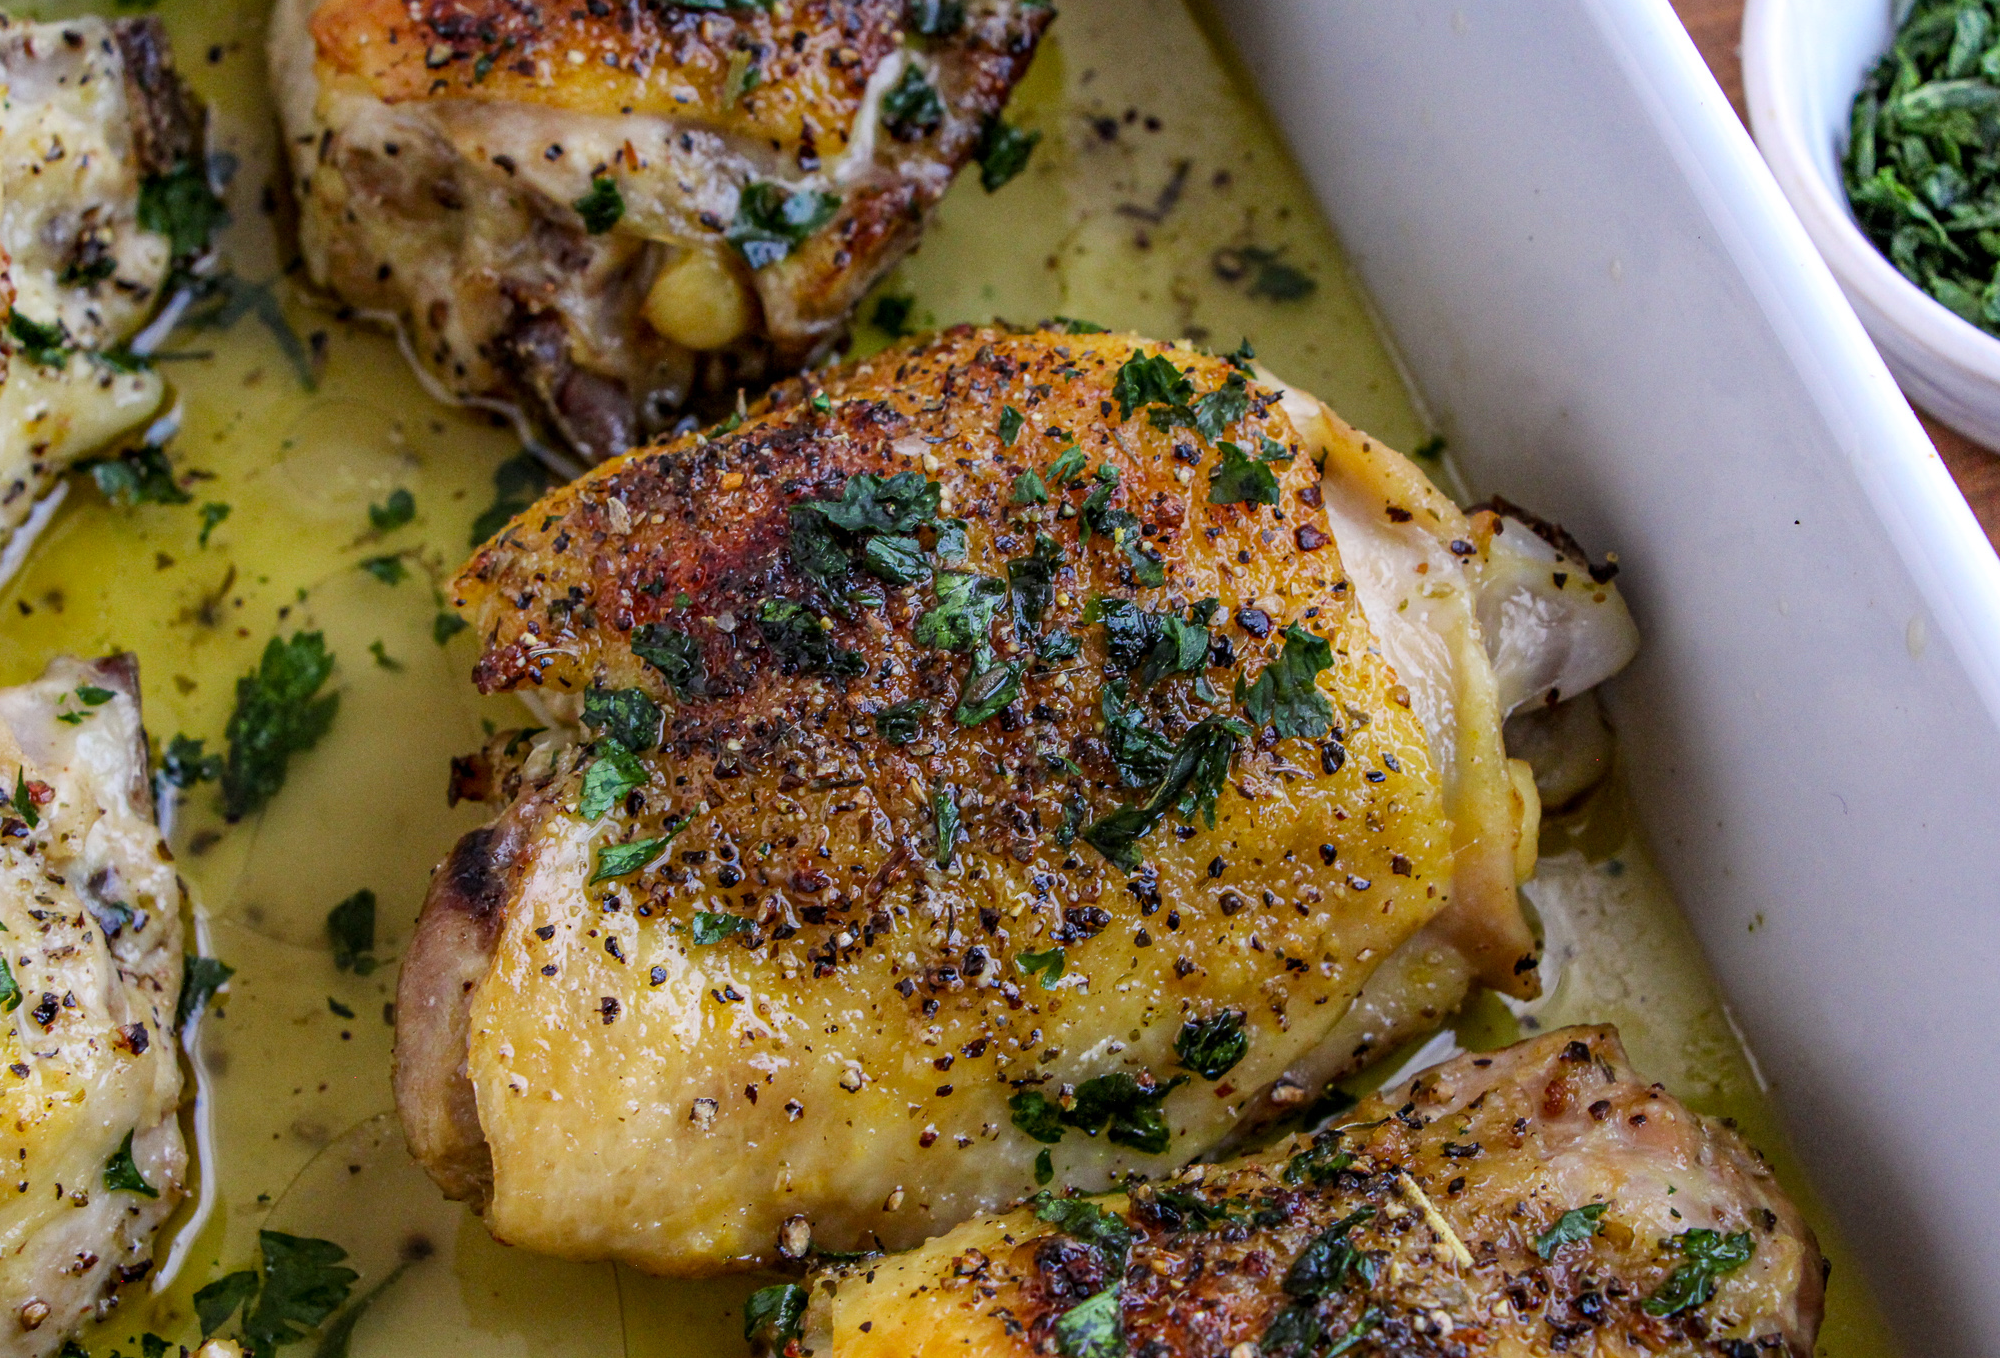 Lemon Pepper Chicken Thigh garnished with parsley and black pepper 